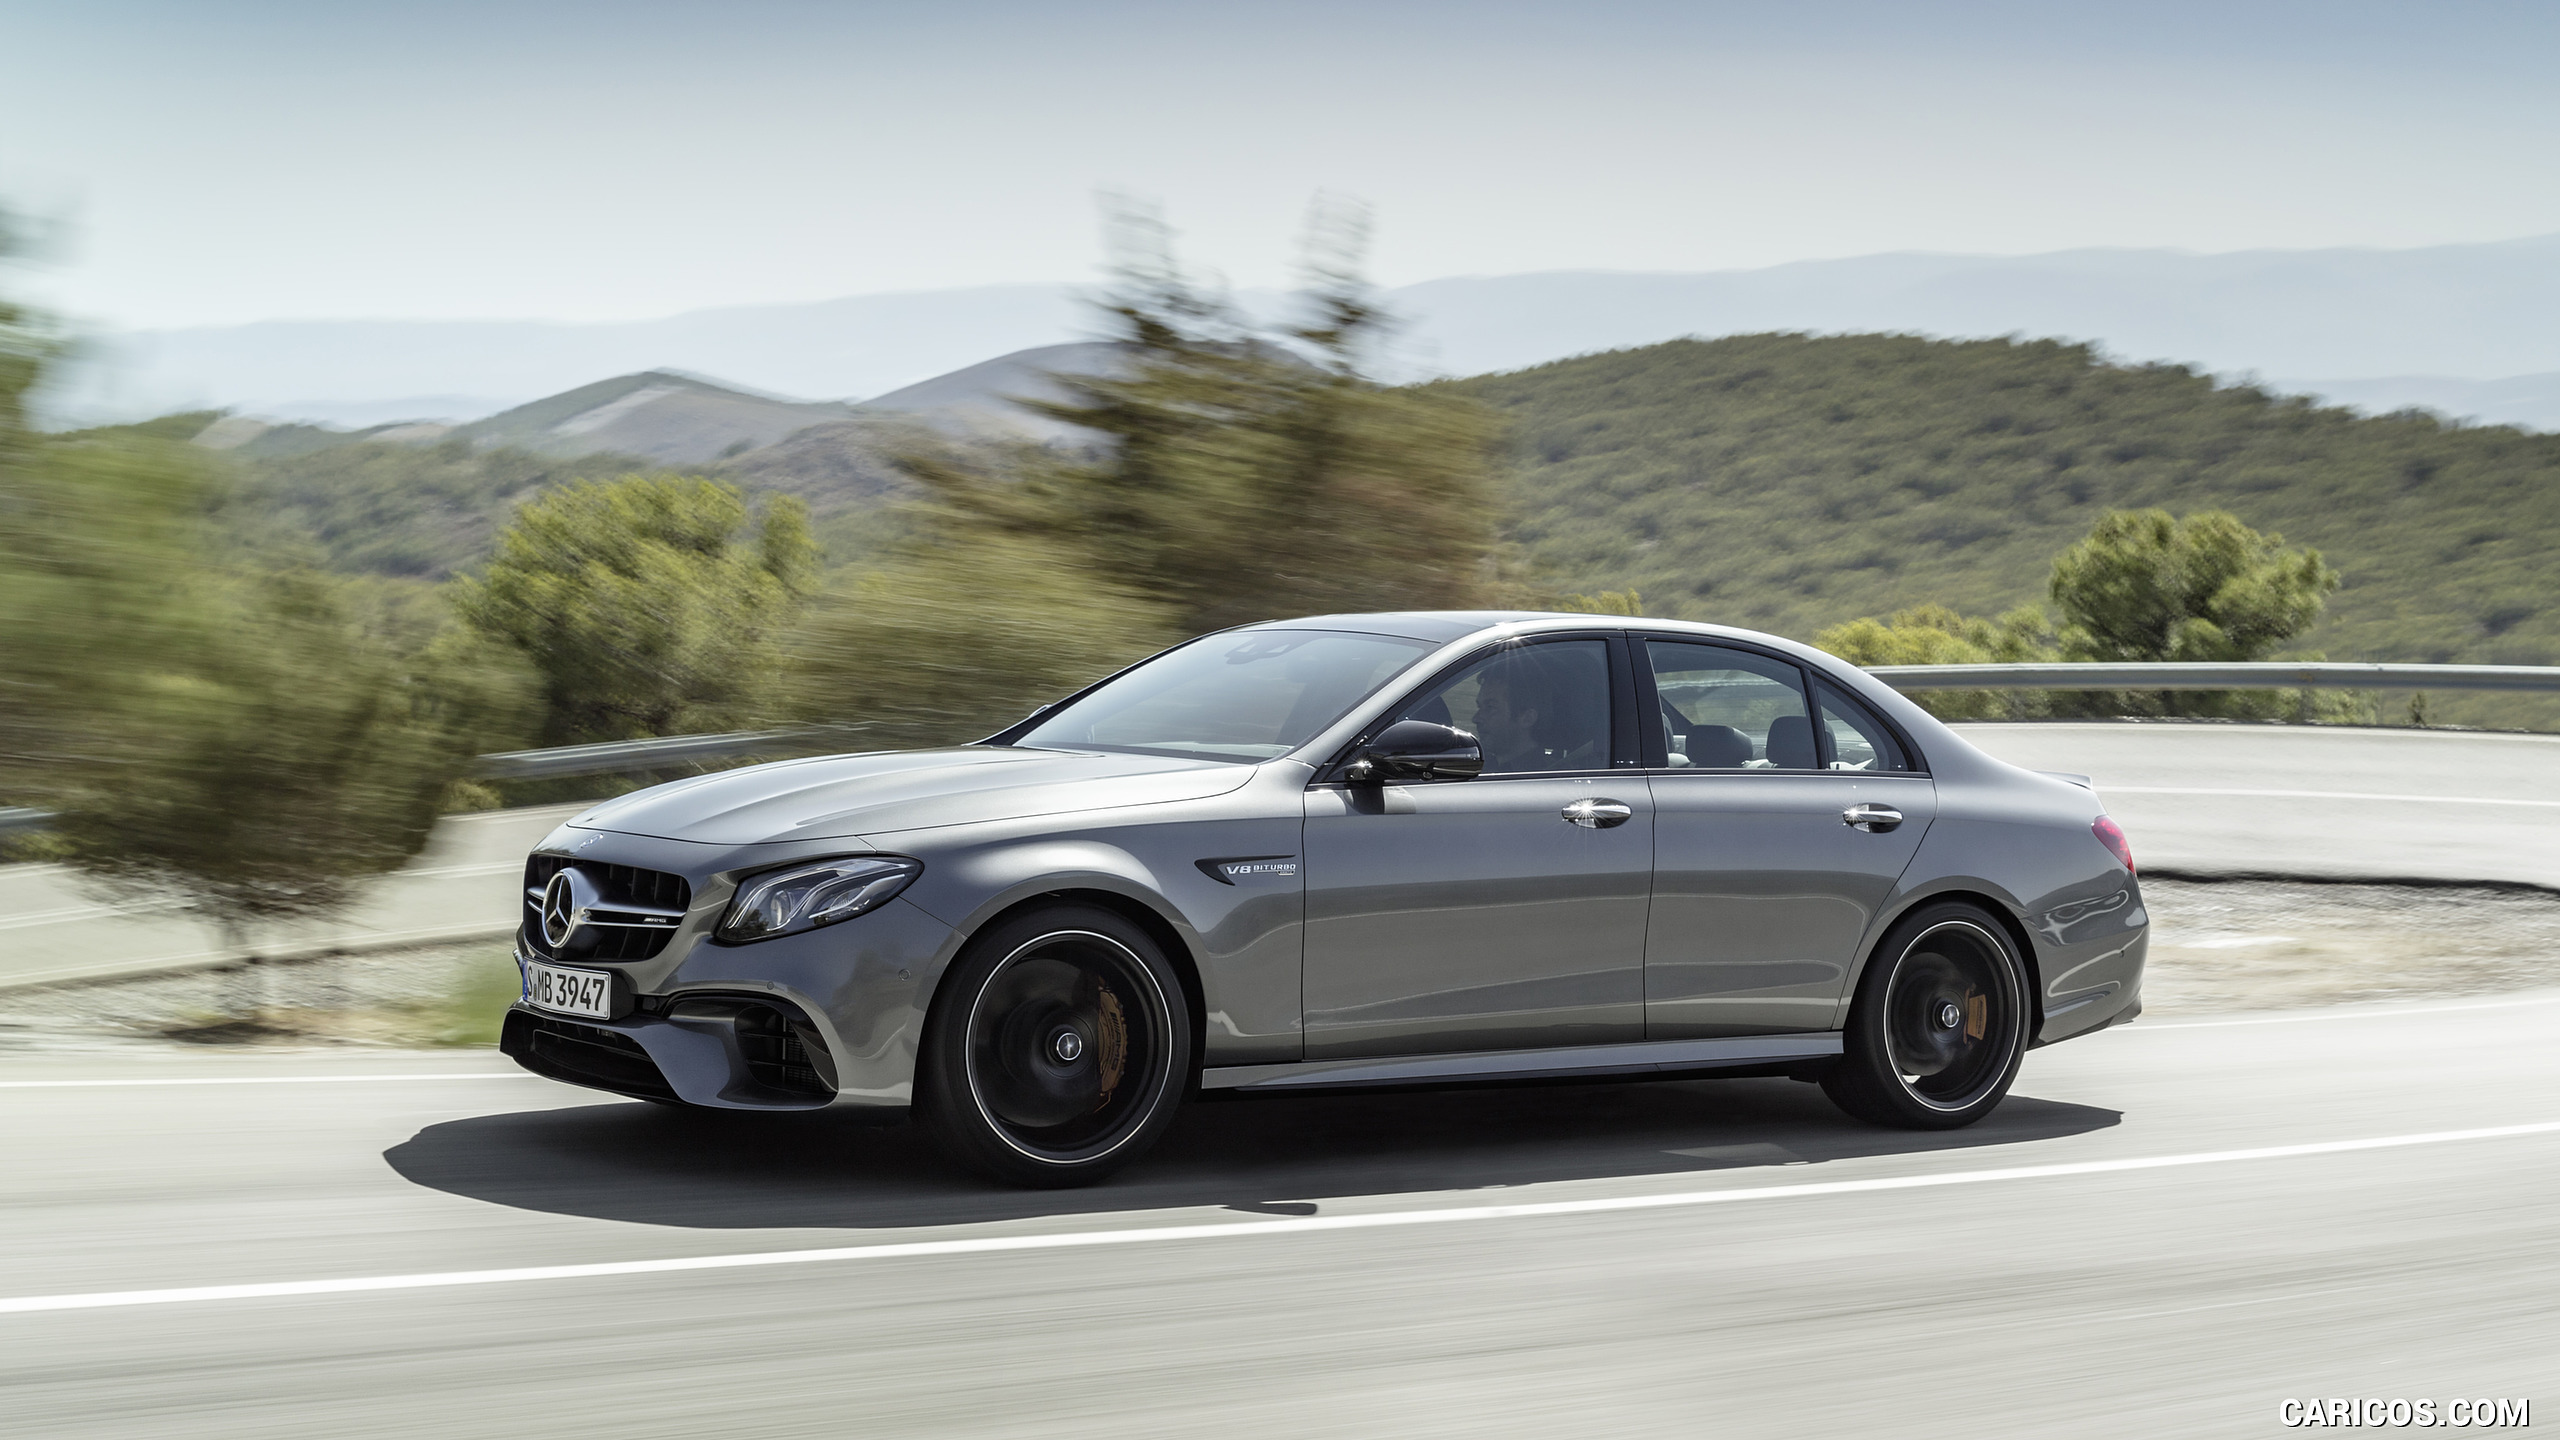 2018 Mercedes-AMG E63 S 4MATIC+ - Side, #4 of 323